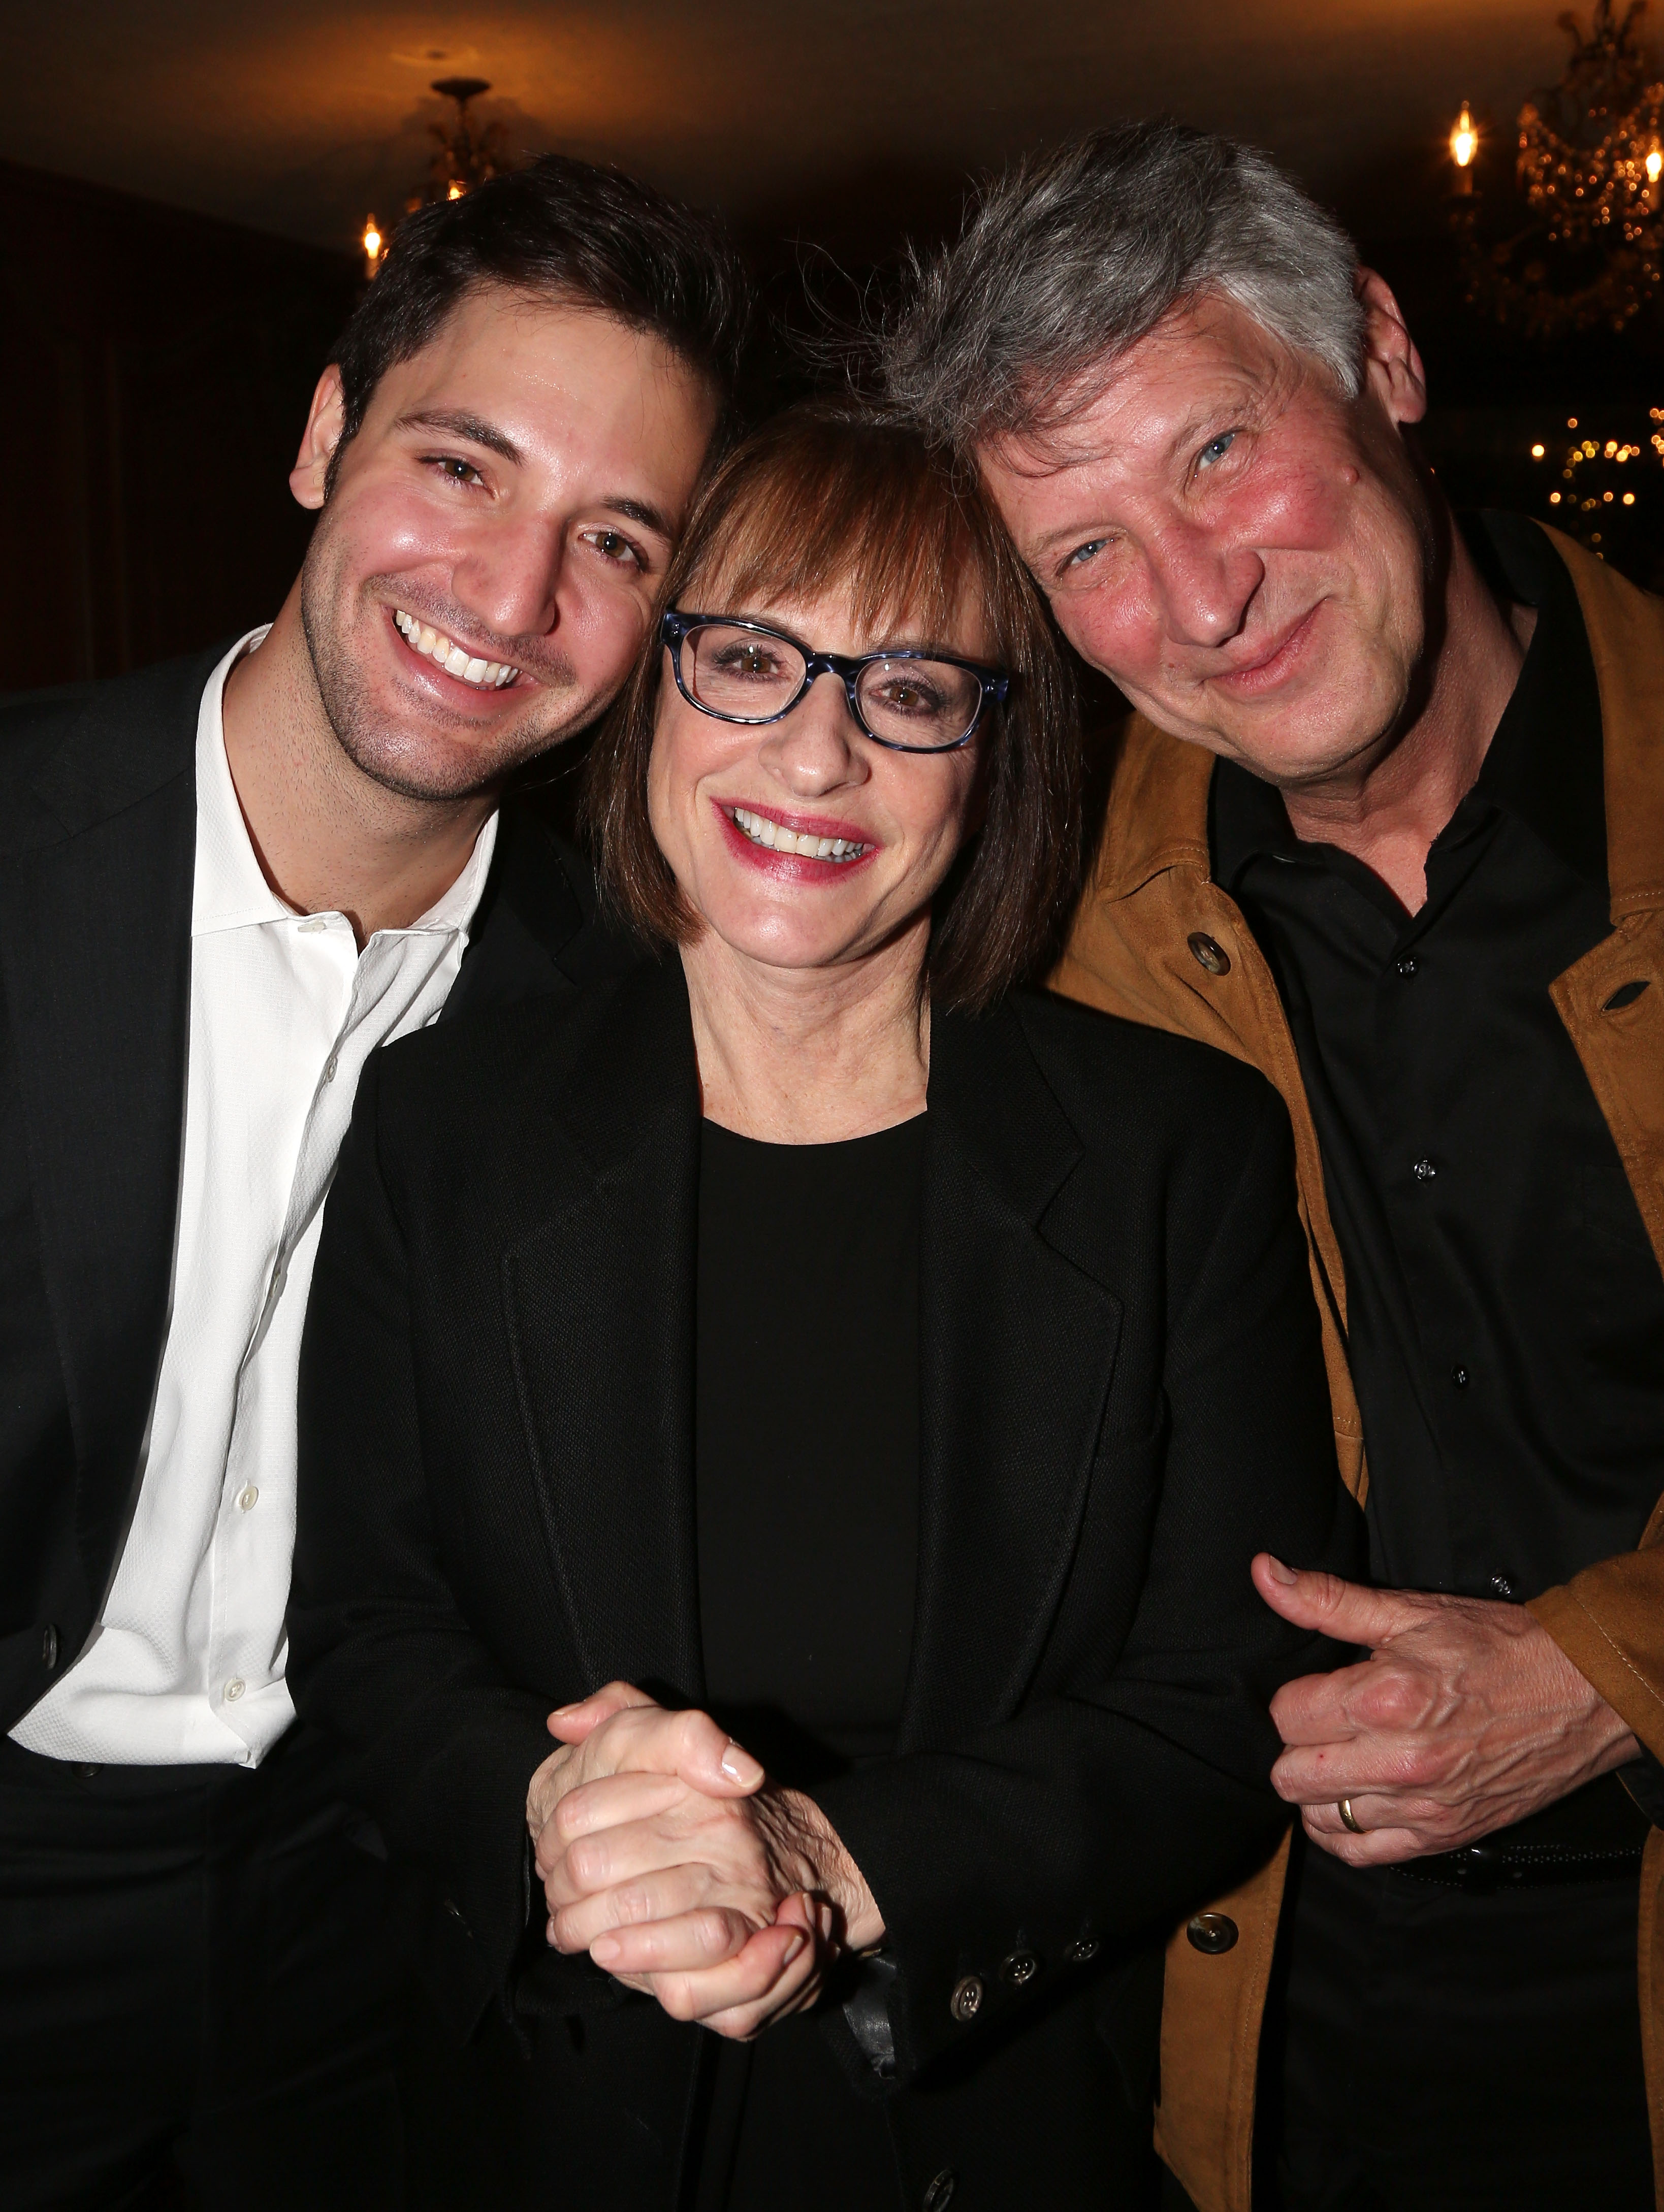 Joshua Johnston, Patti LuPone and Matthew Johnston pose at the After Party for The Acting Company benefit production of Tennessee Williams' "The Rose Tattoo" on Broadway at Barbetta on April 27, 2015, in New York City | Source: Getty Images